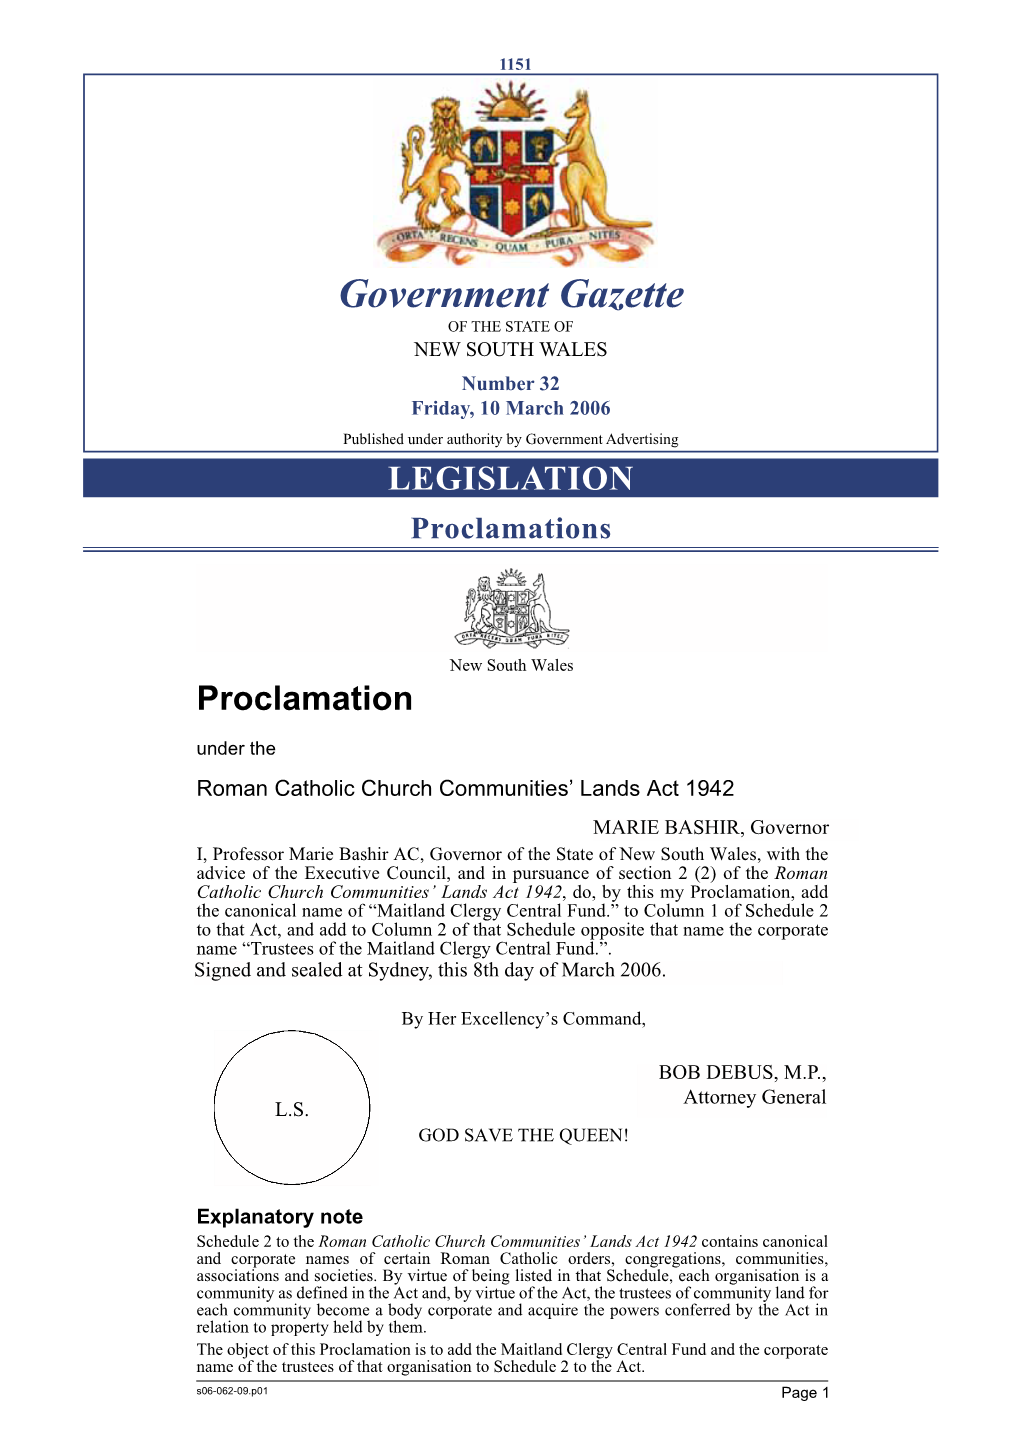 Government Gazette of the STATE of NEW SOUTH WALES Number 32 Friday, 10 March 2006 Published Under Authority by Government Advertising LEGISLATION Proclamations